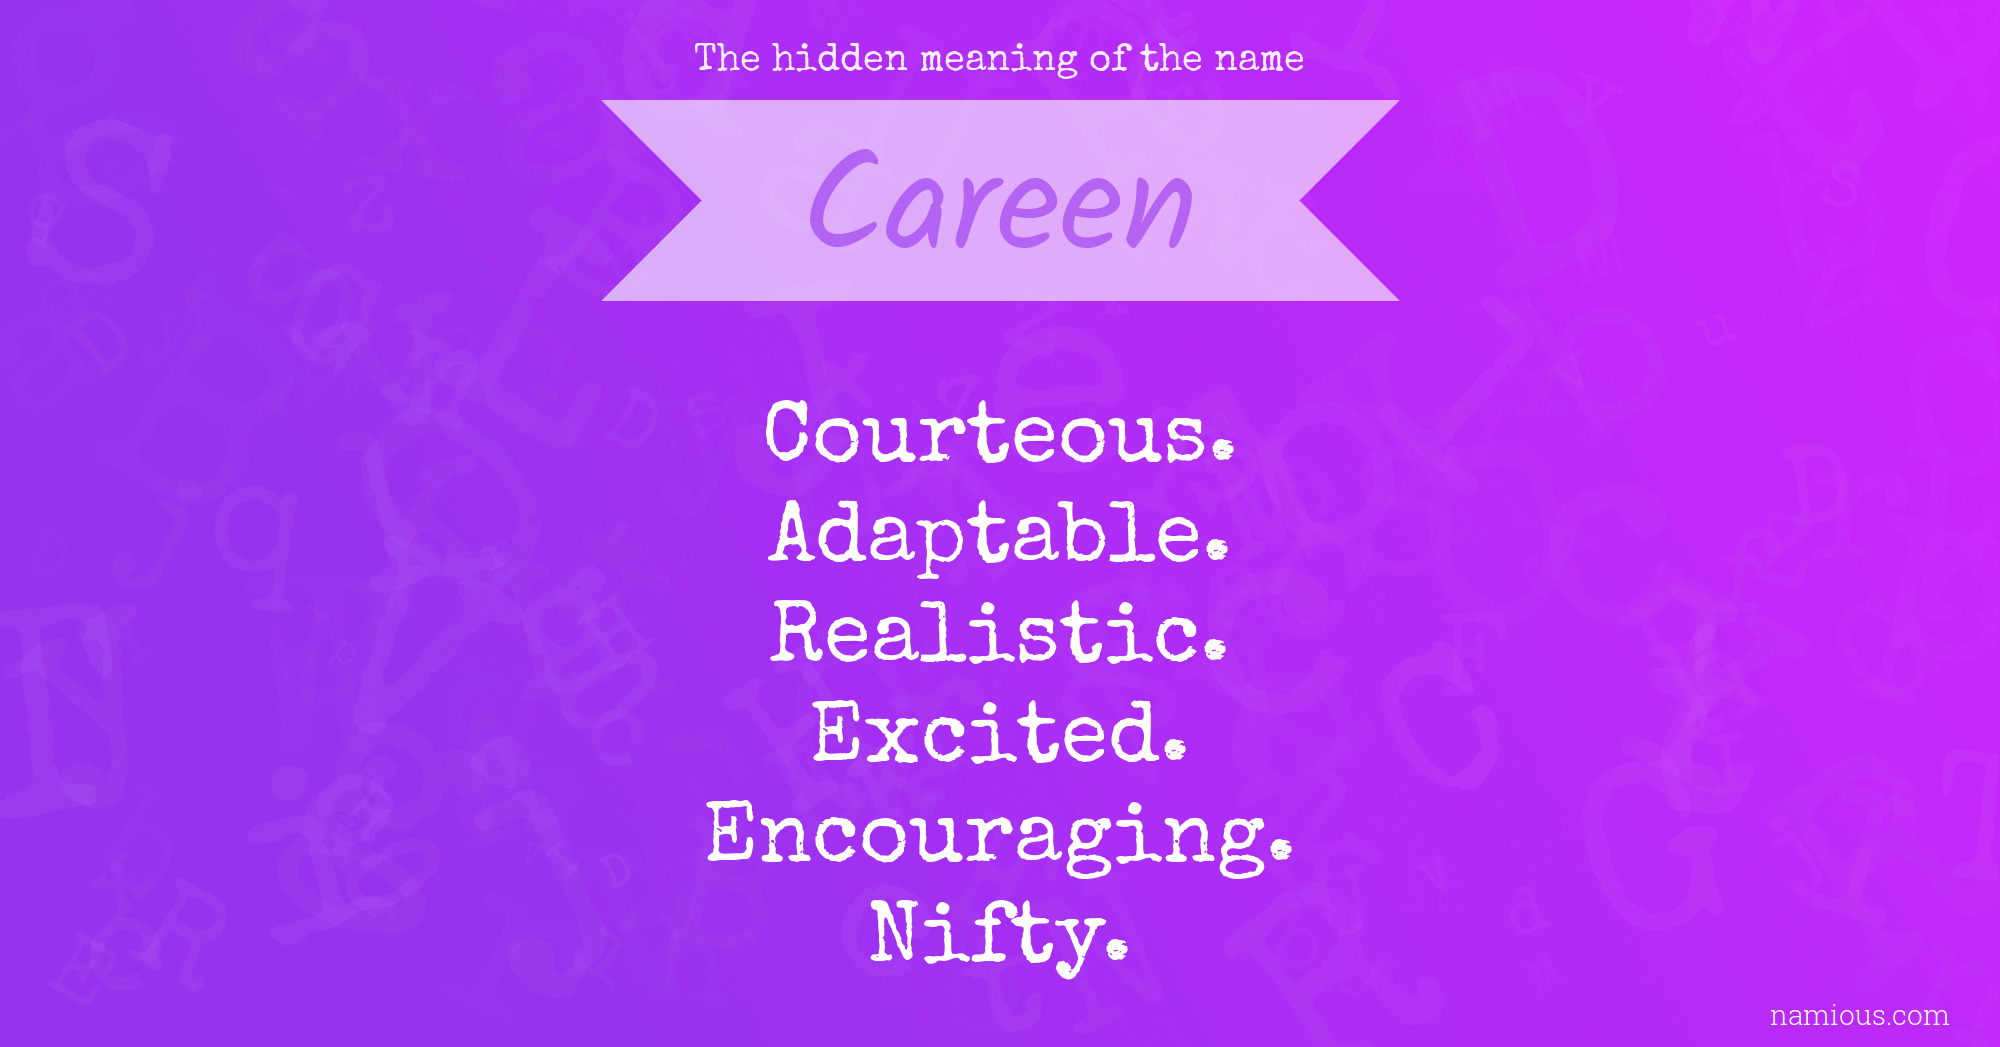 The hidden meaning of the name Careen